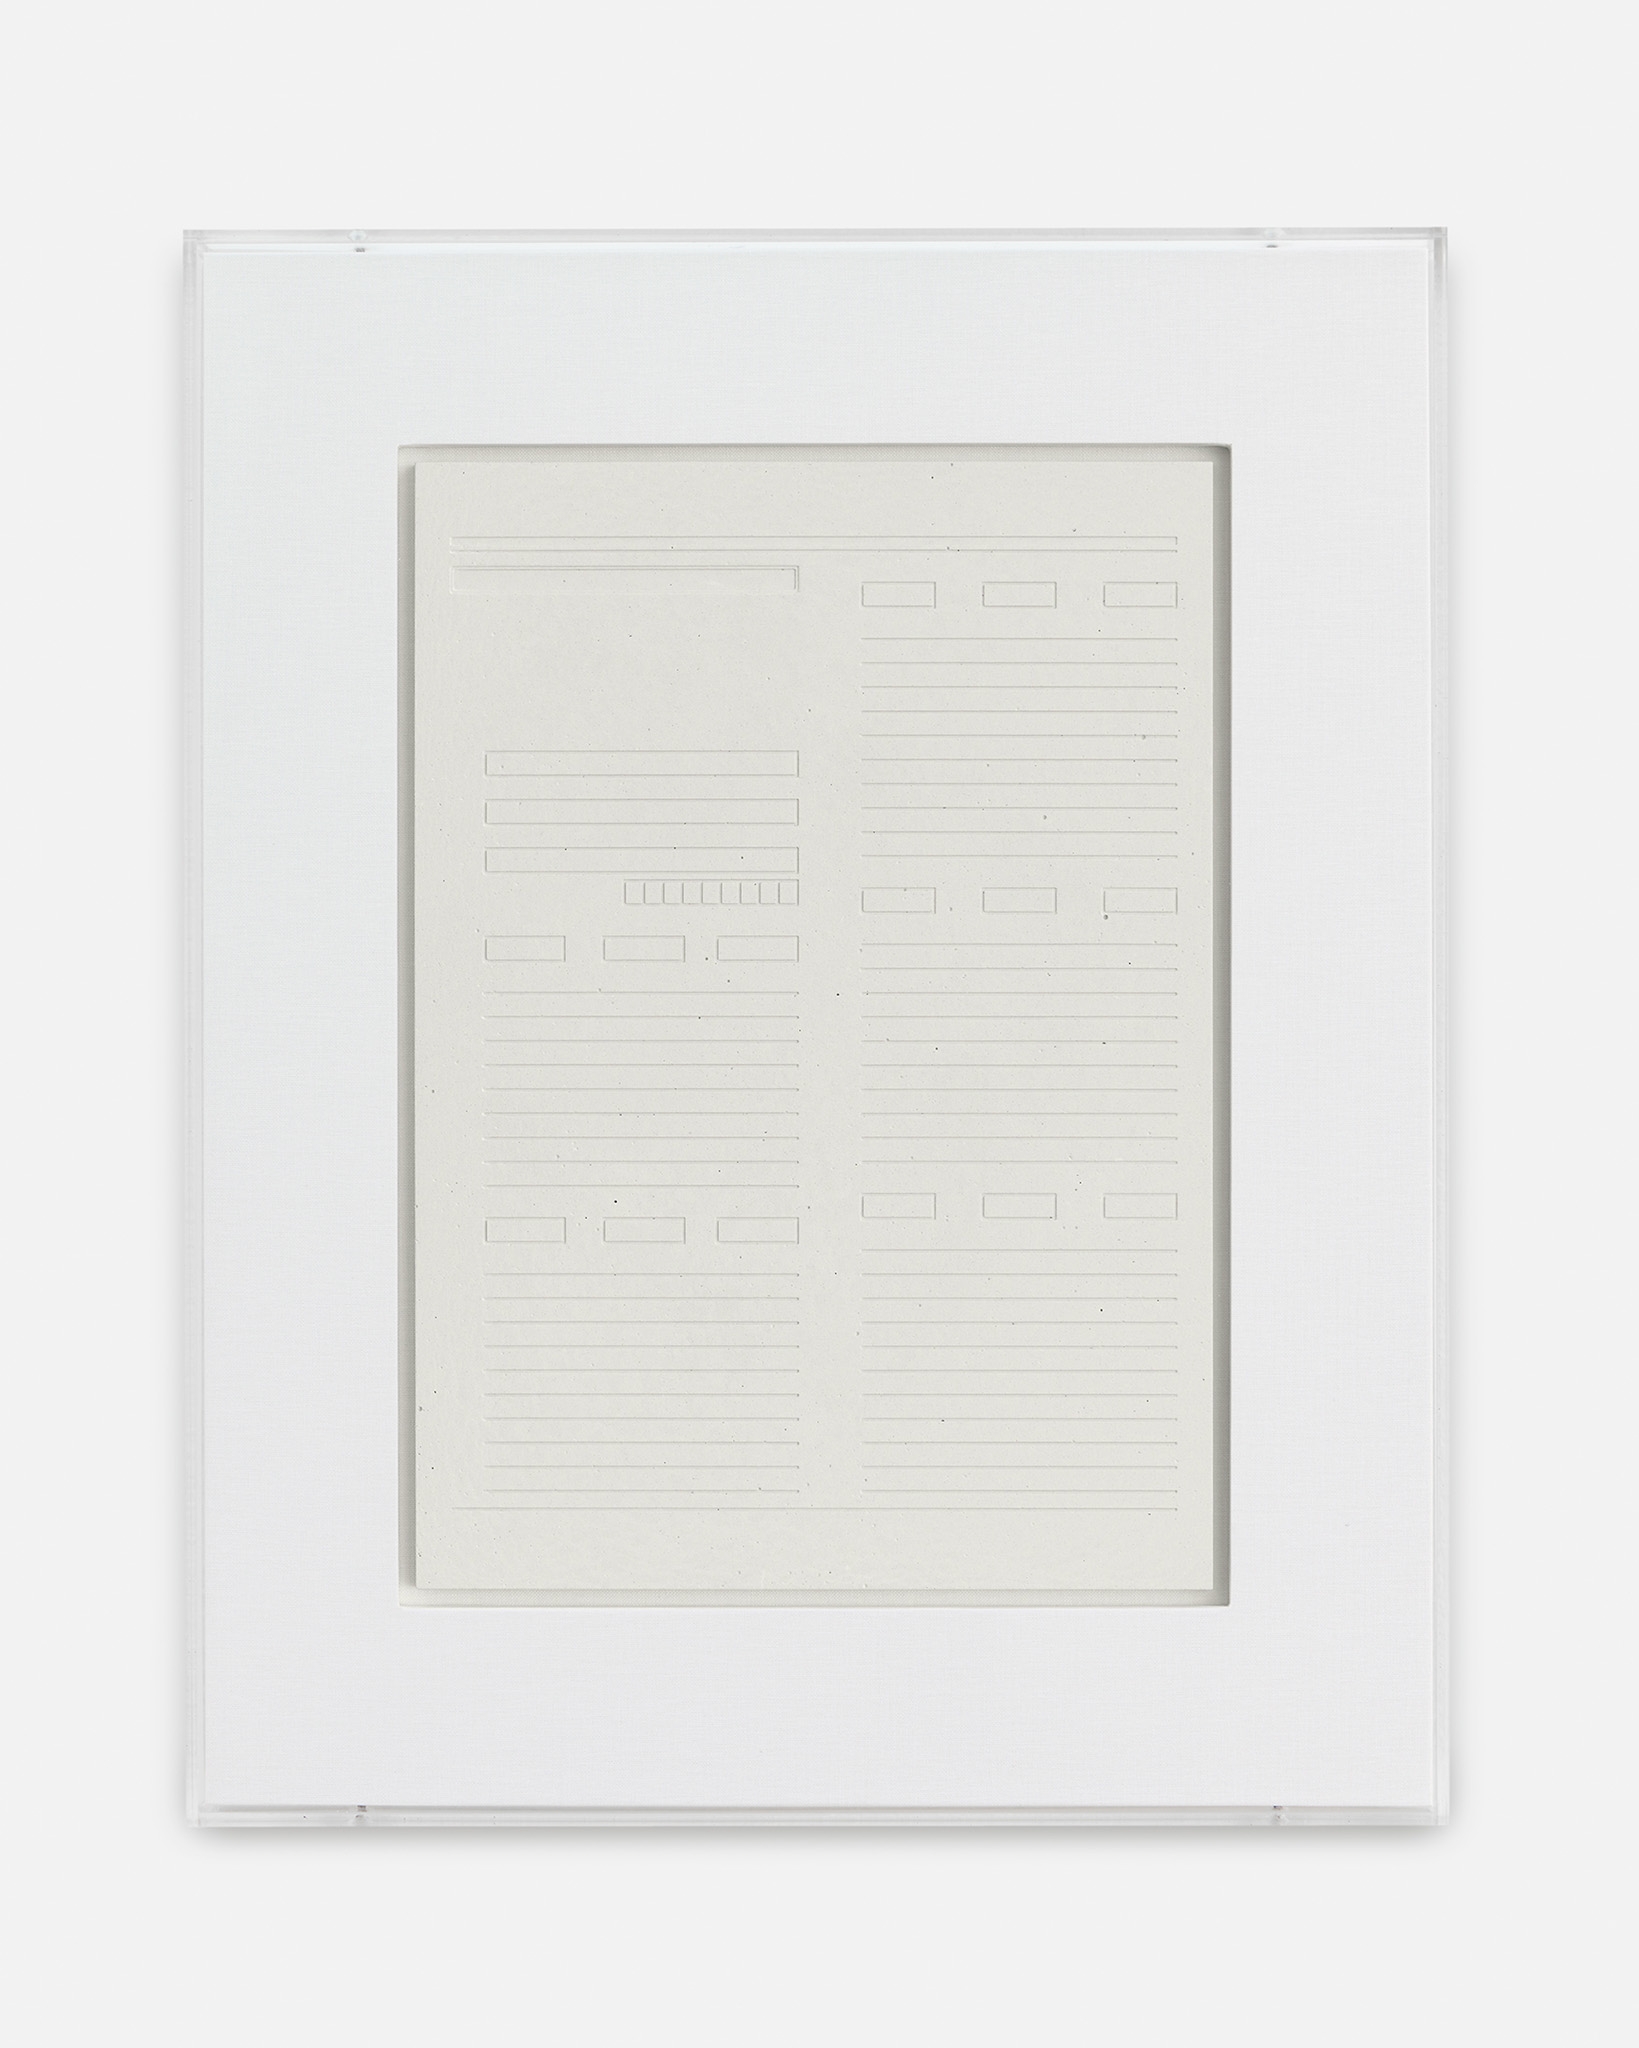 Sung Tieu, Grid form I-602, 2022, Plaster, framed in linen on wood and perspex, Exhibition view MUDAM Luxembourg, 2022